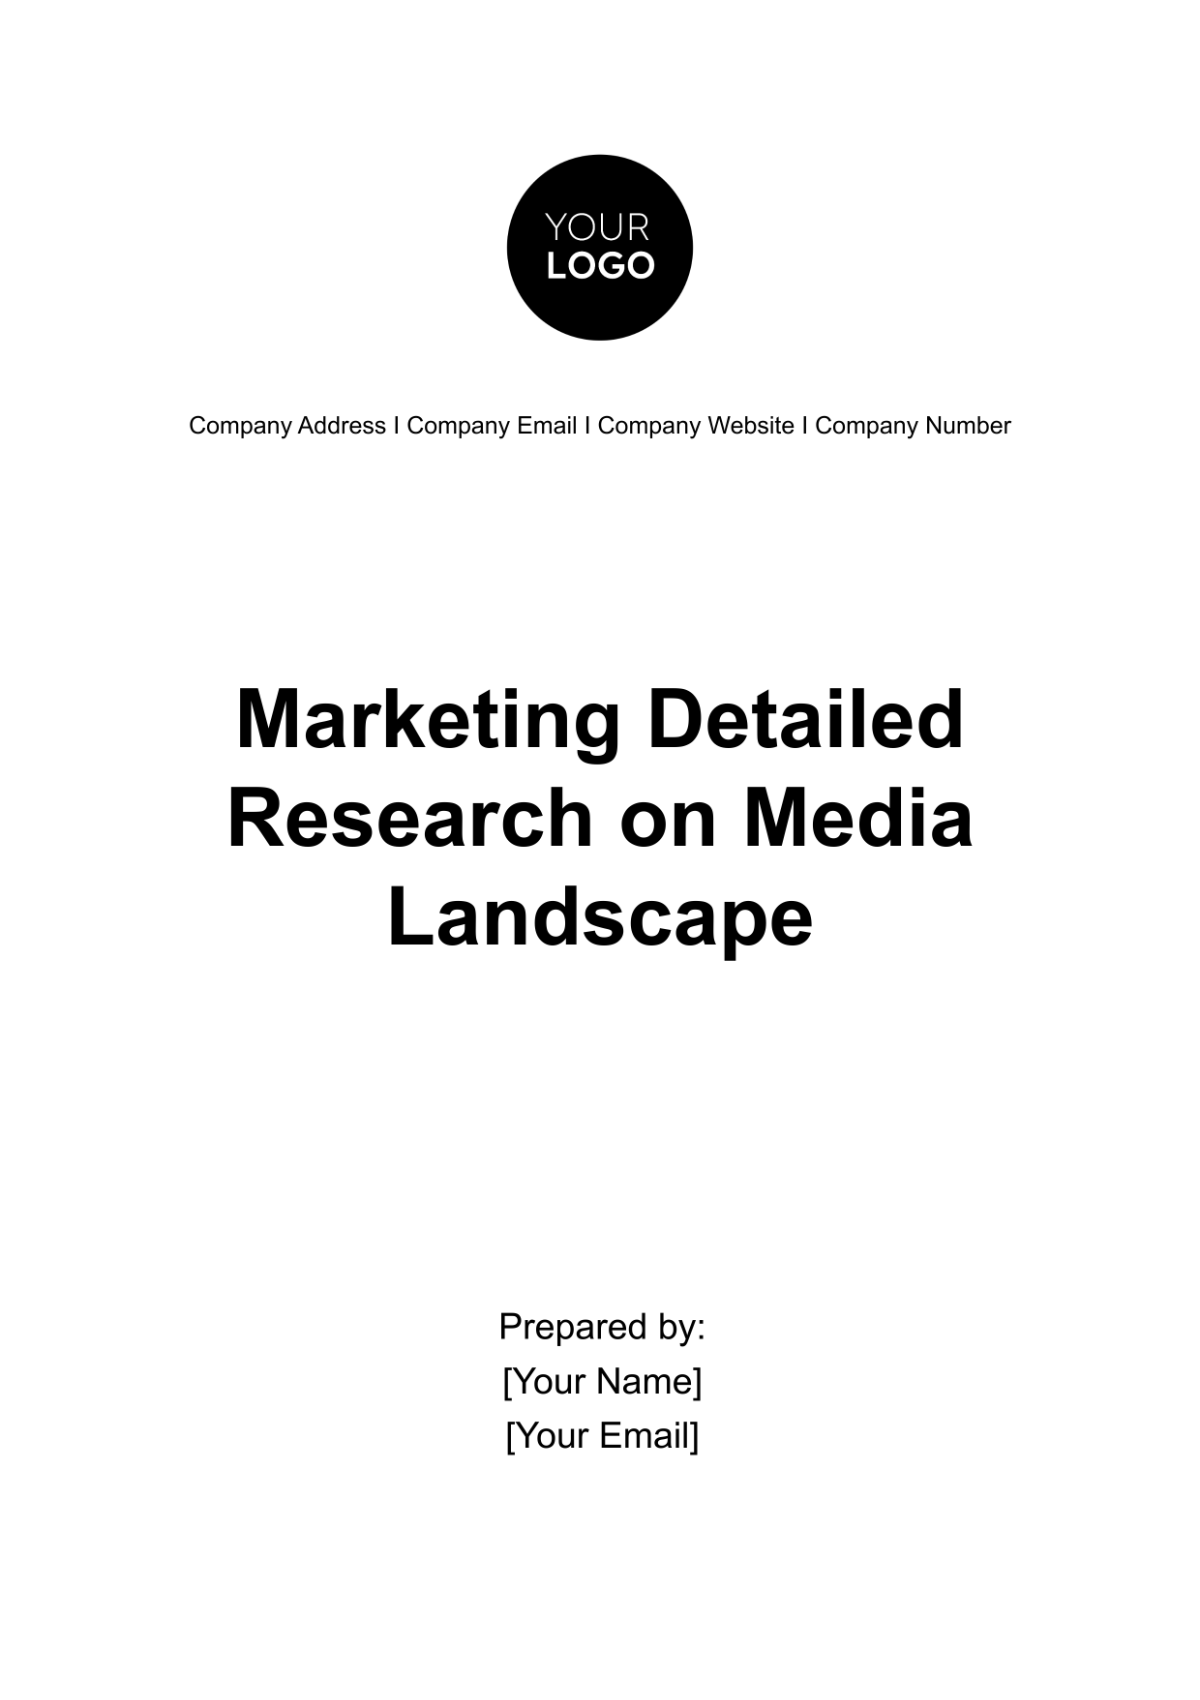 Free Marketing Detailed Research on Media Landscape Template